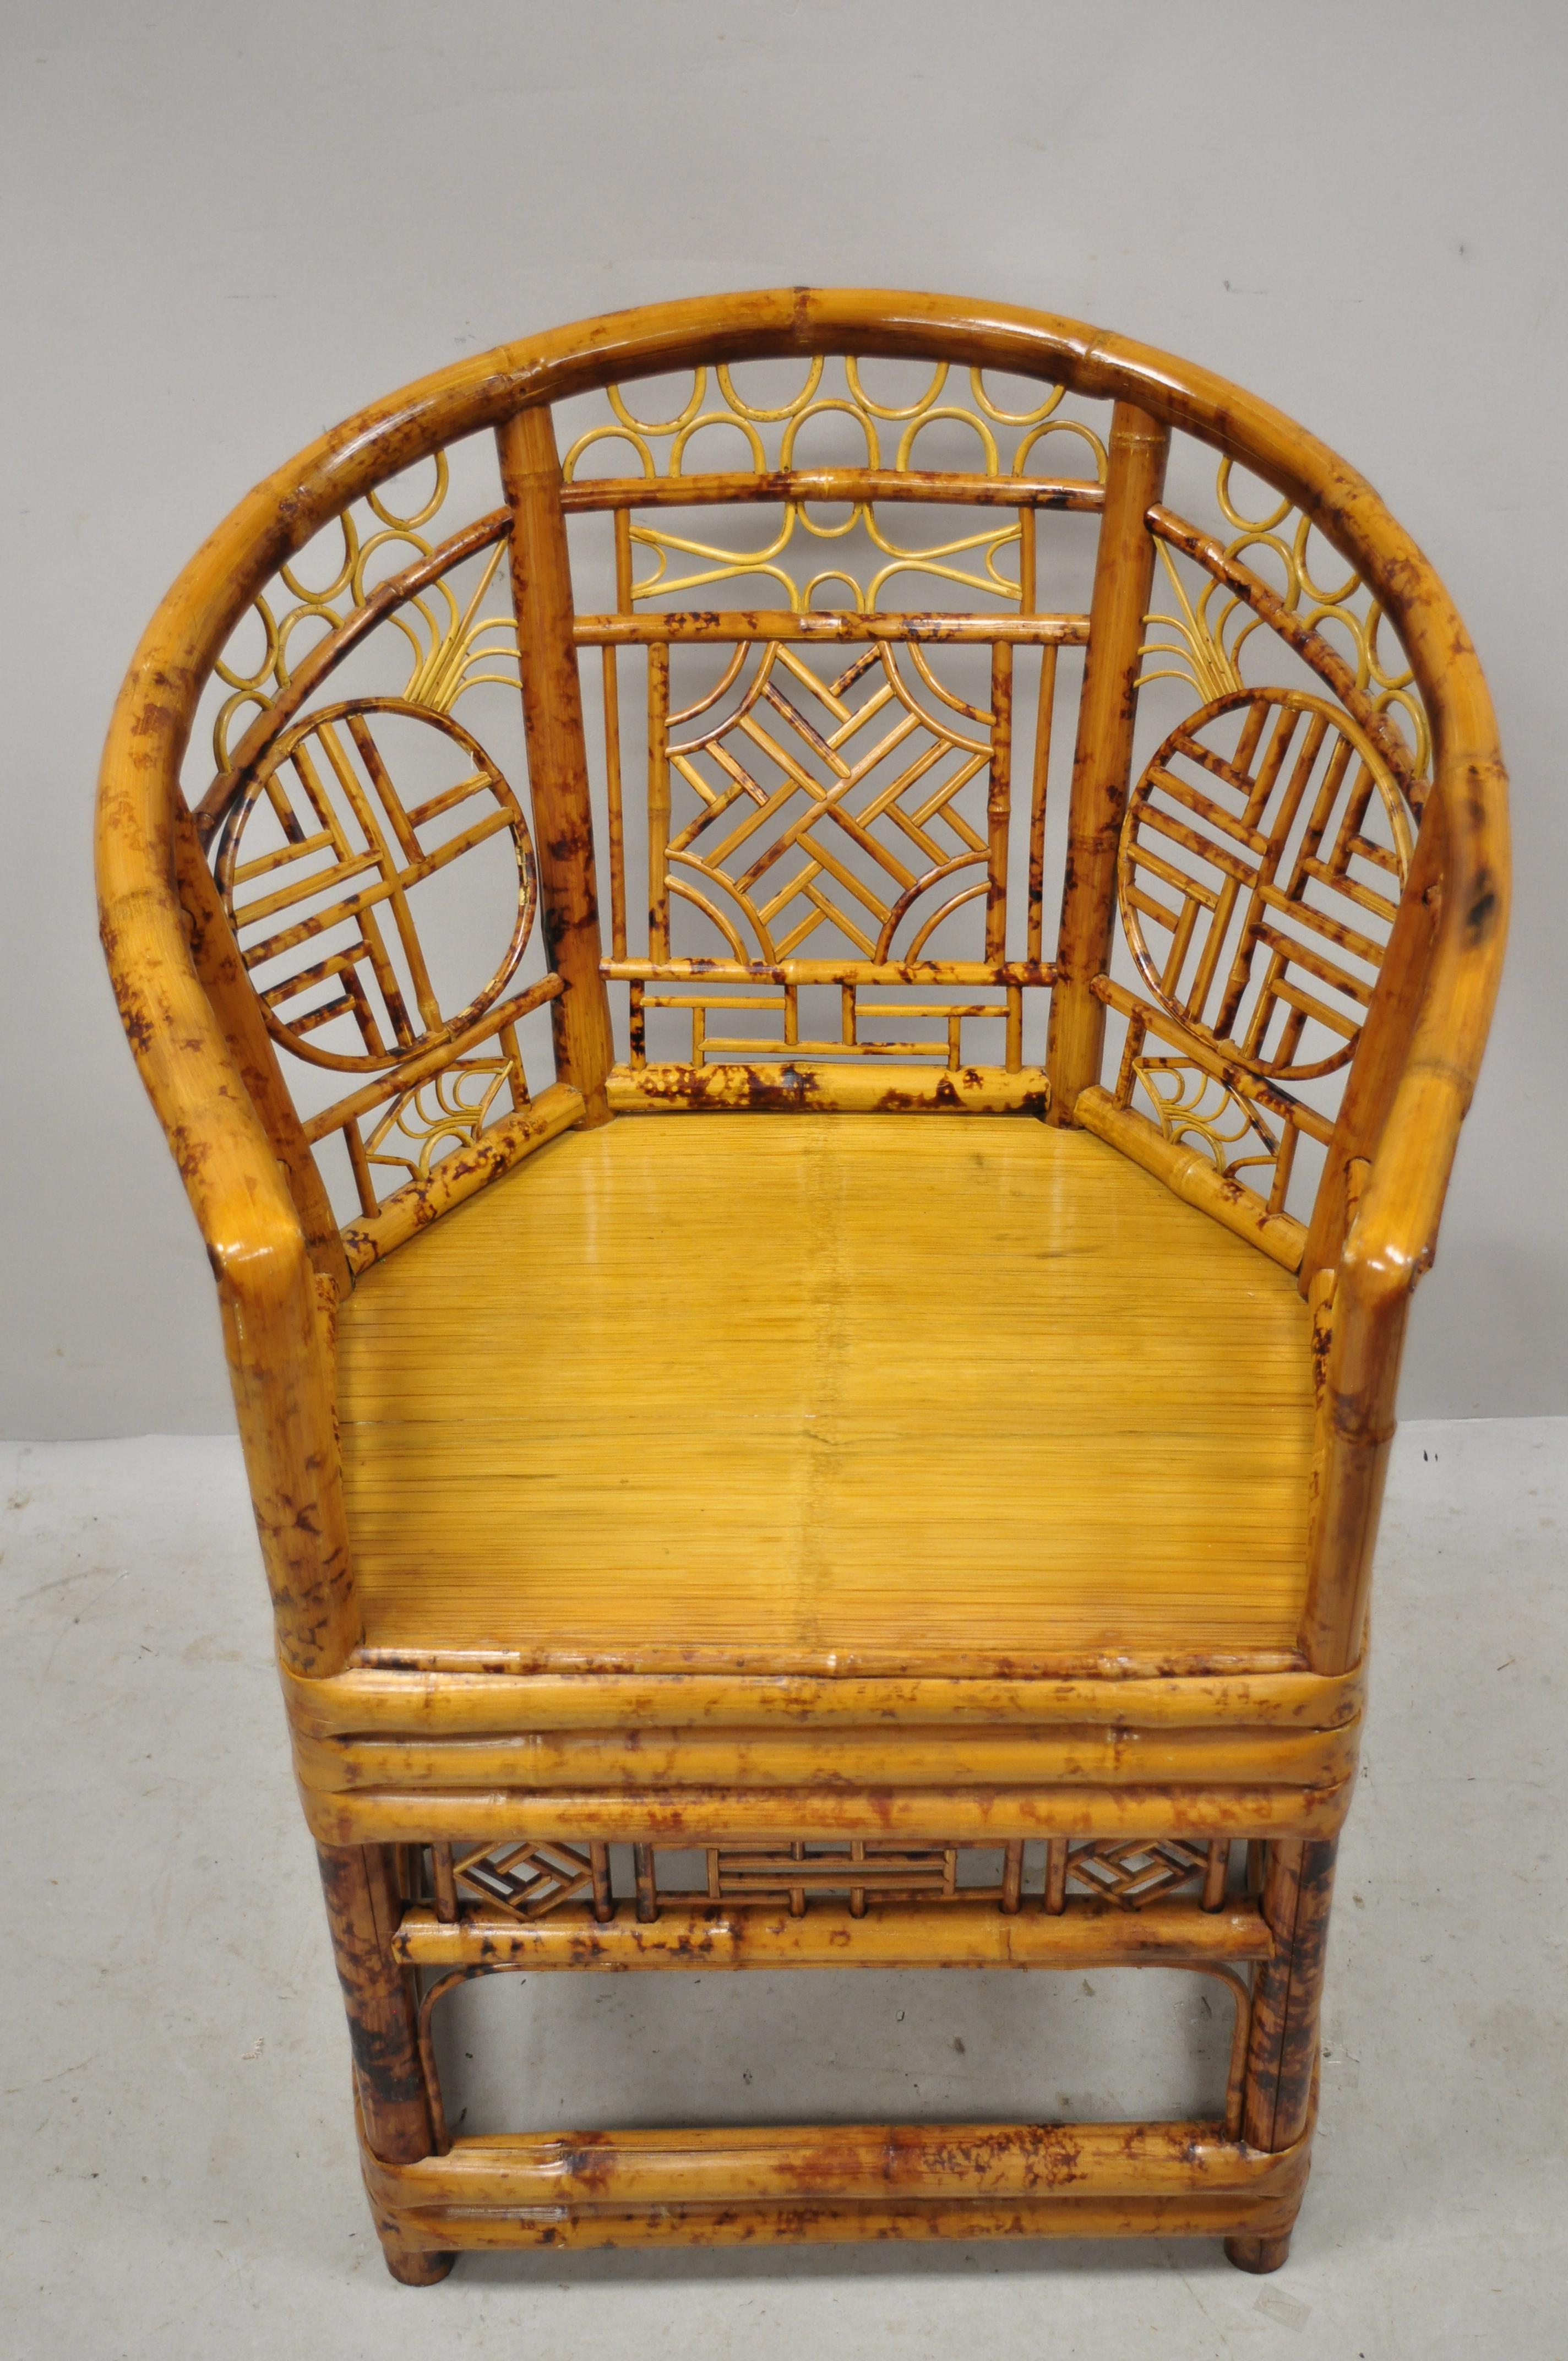 Vintage chinoiserie bamboo oriental throne lounge armchair. Item is a very nice vintage item, clean modernist lines, great style and form, circa mid-late 20th century. Measurements: 37